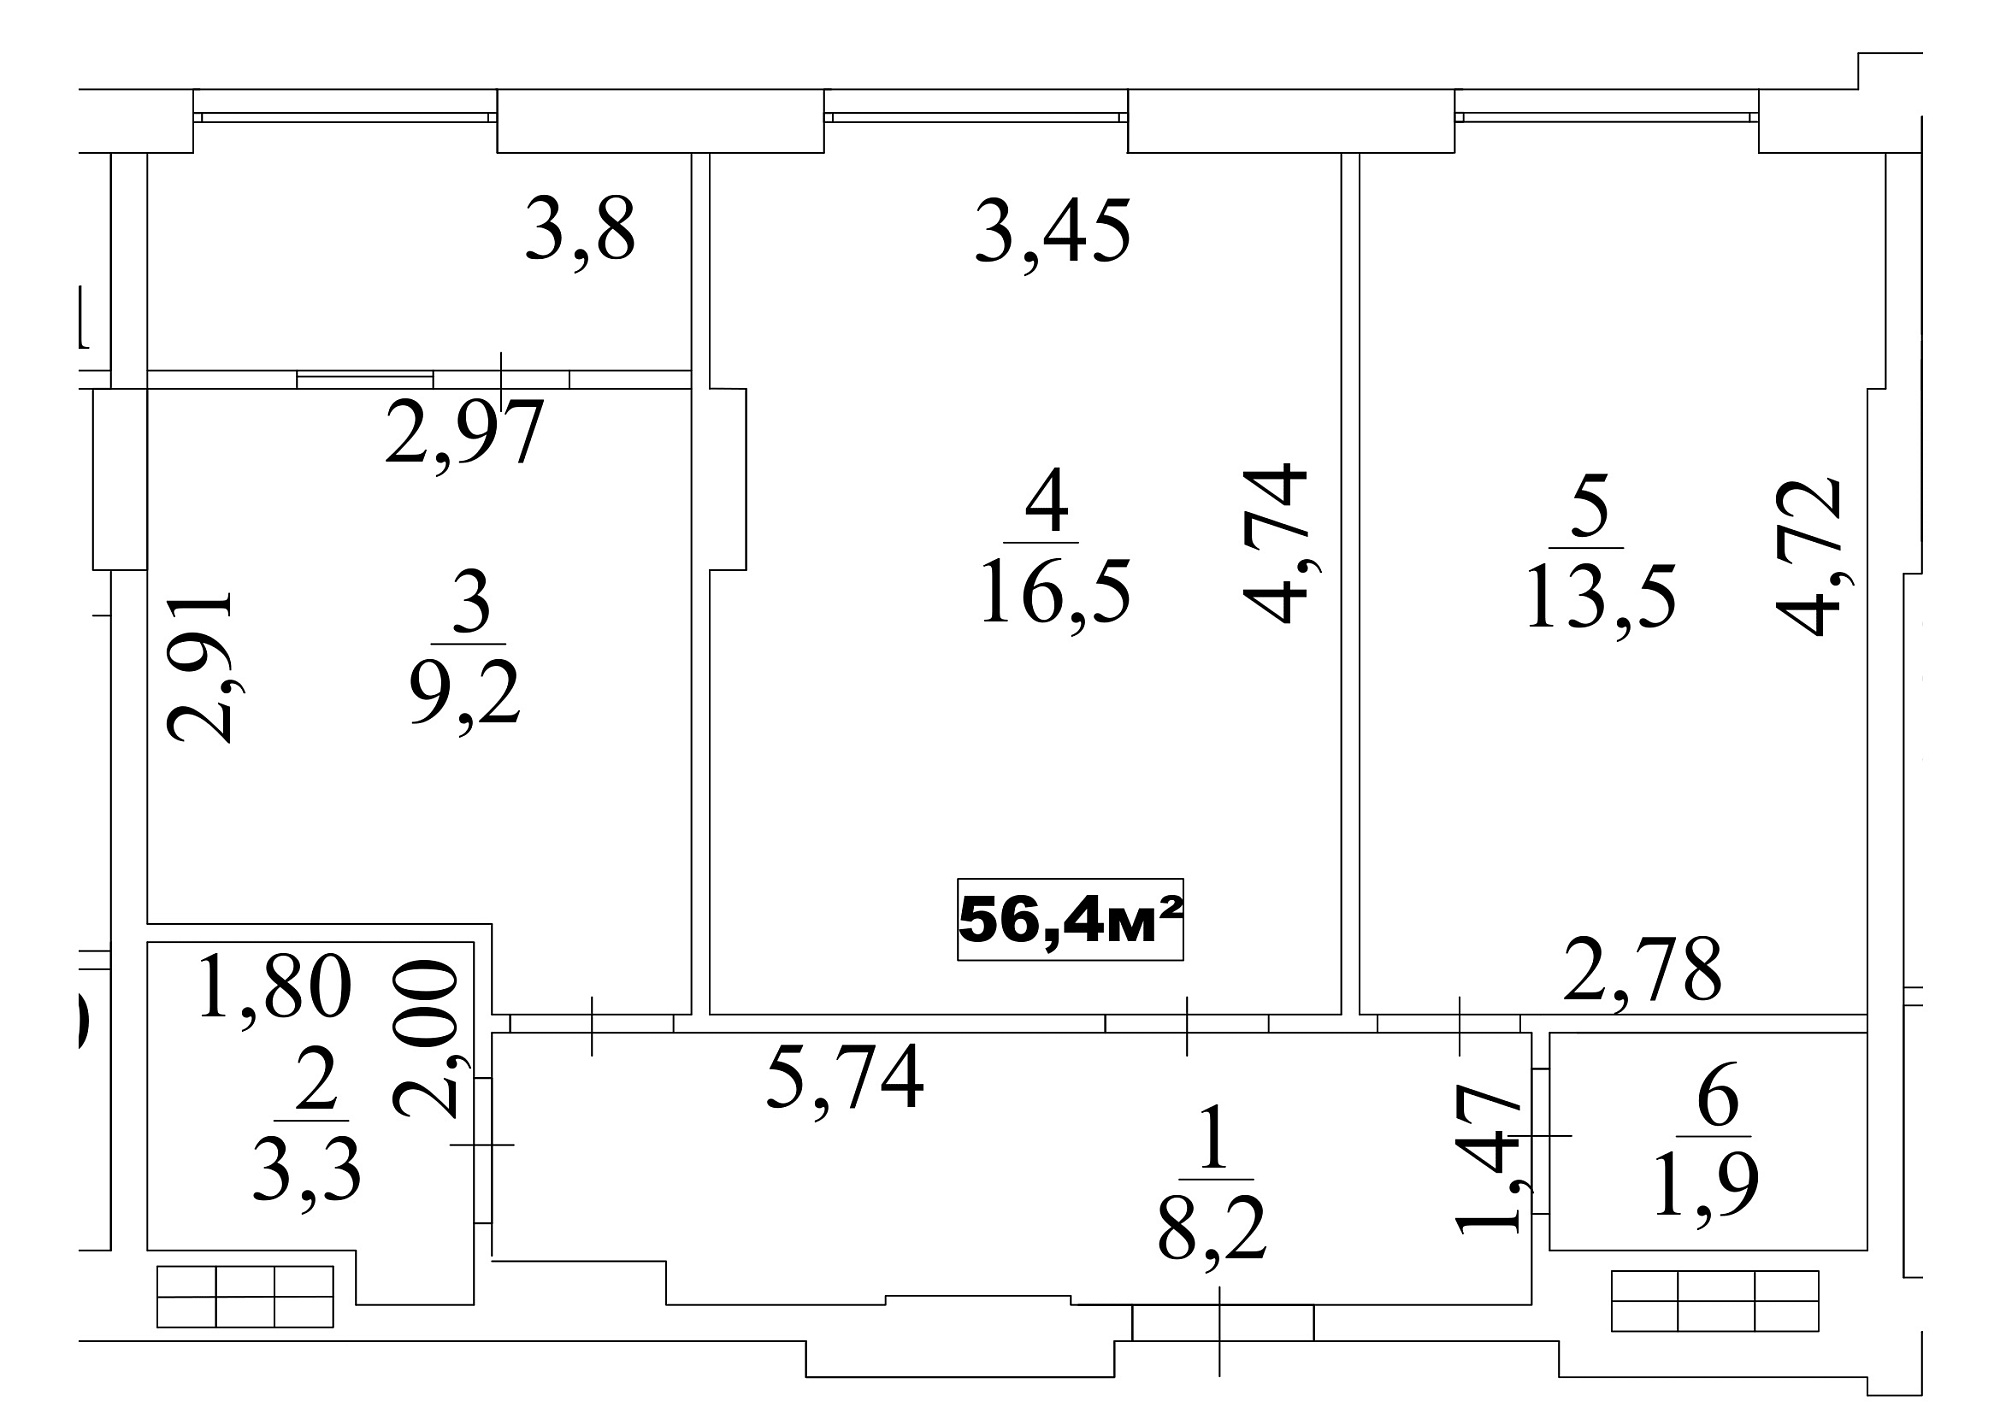 Planning 2-rm flats area 56.4m2, AB-10-09/00076.